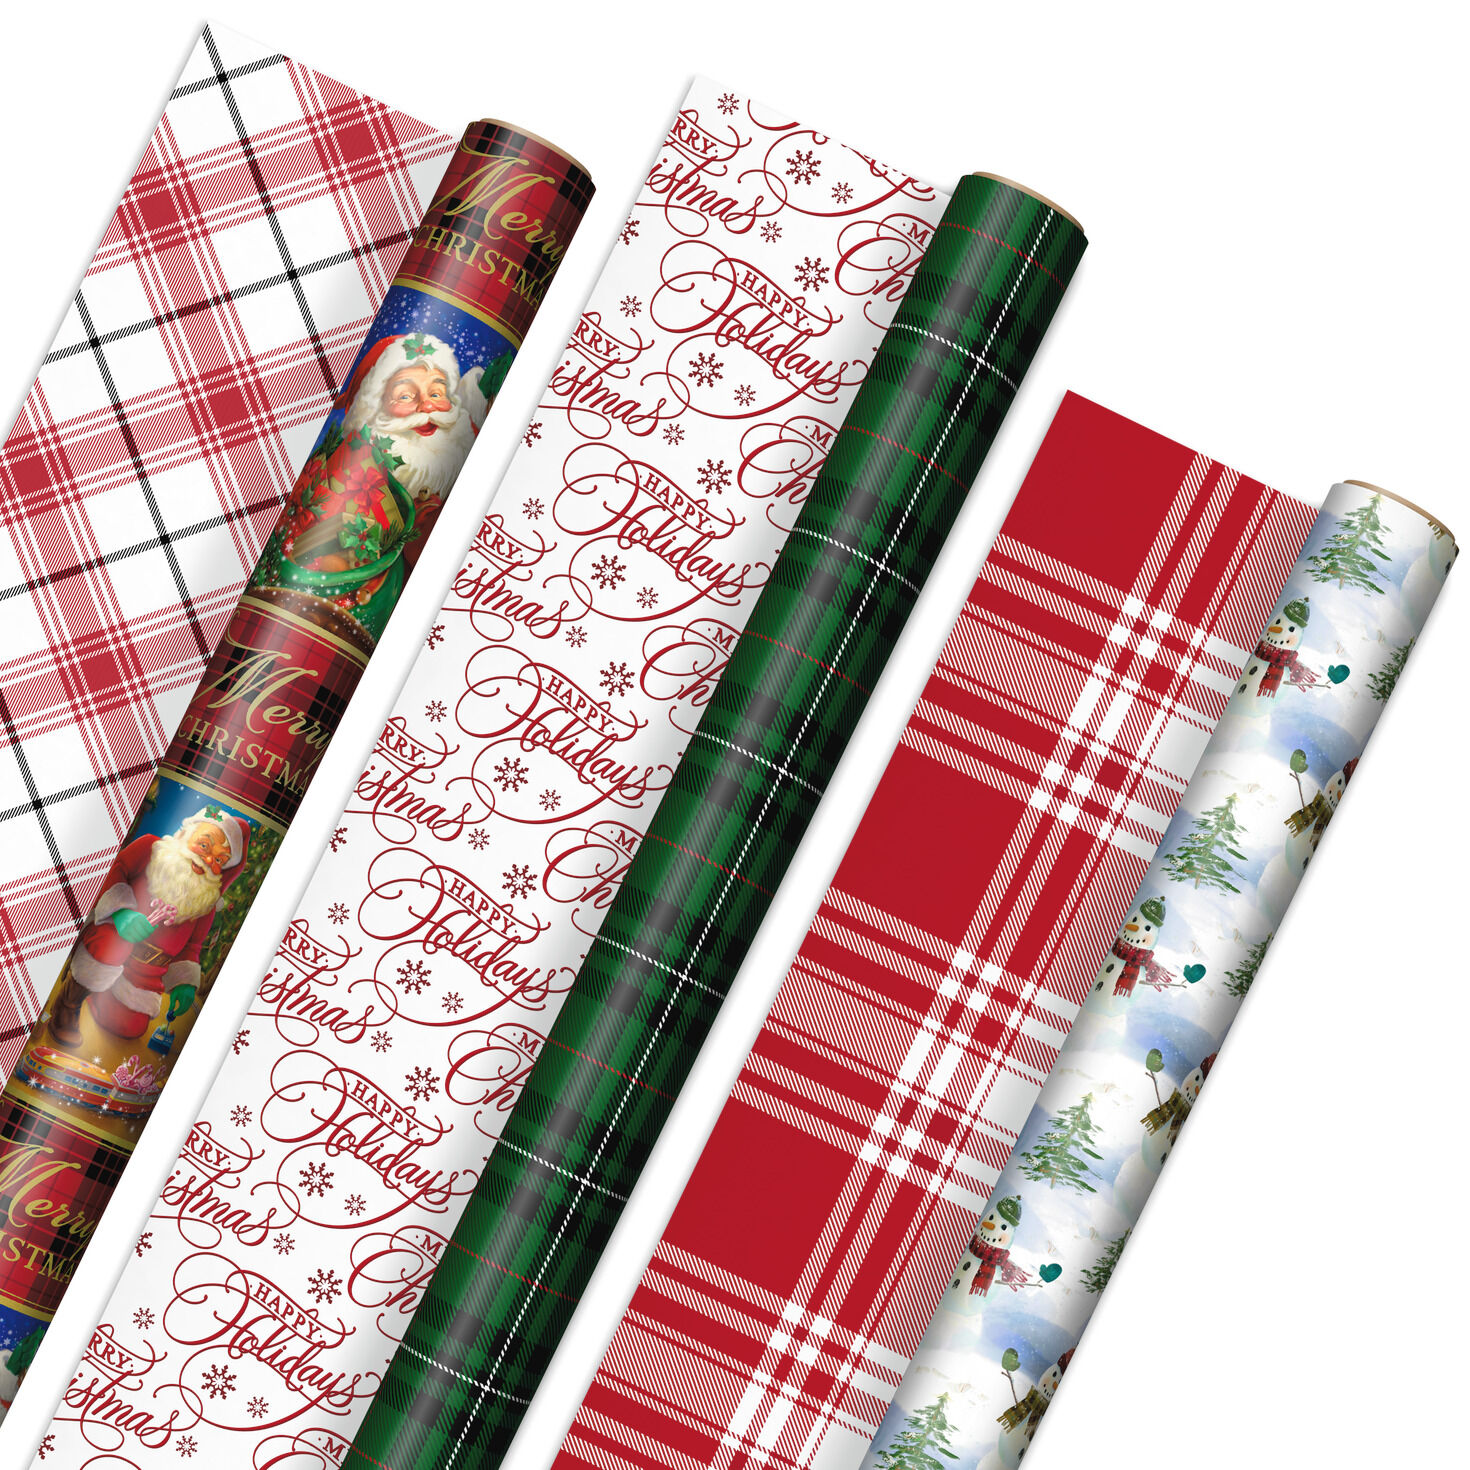 Gift Wrap Company 3-Count Choice of Assortment Wrapping Paper w